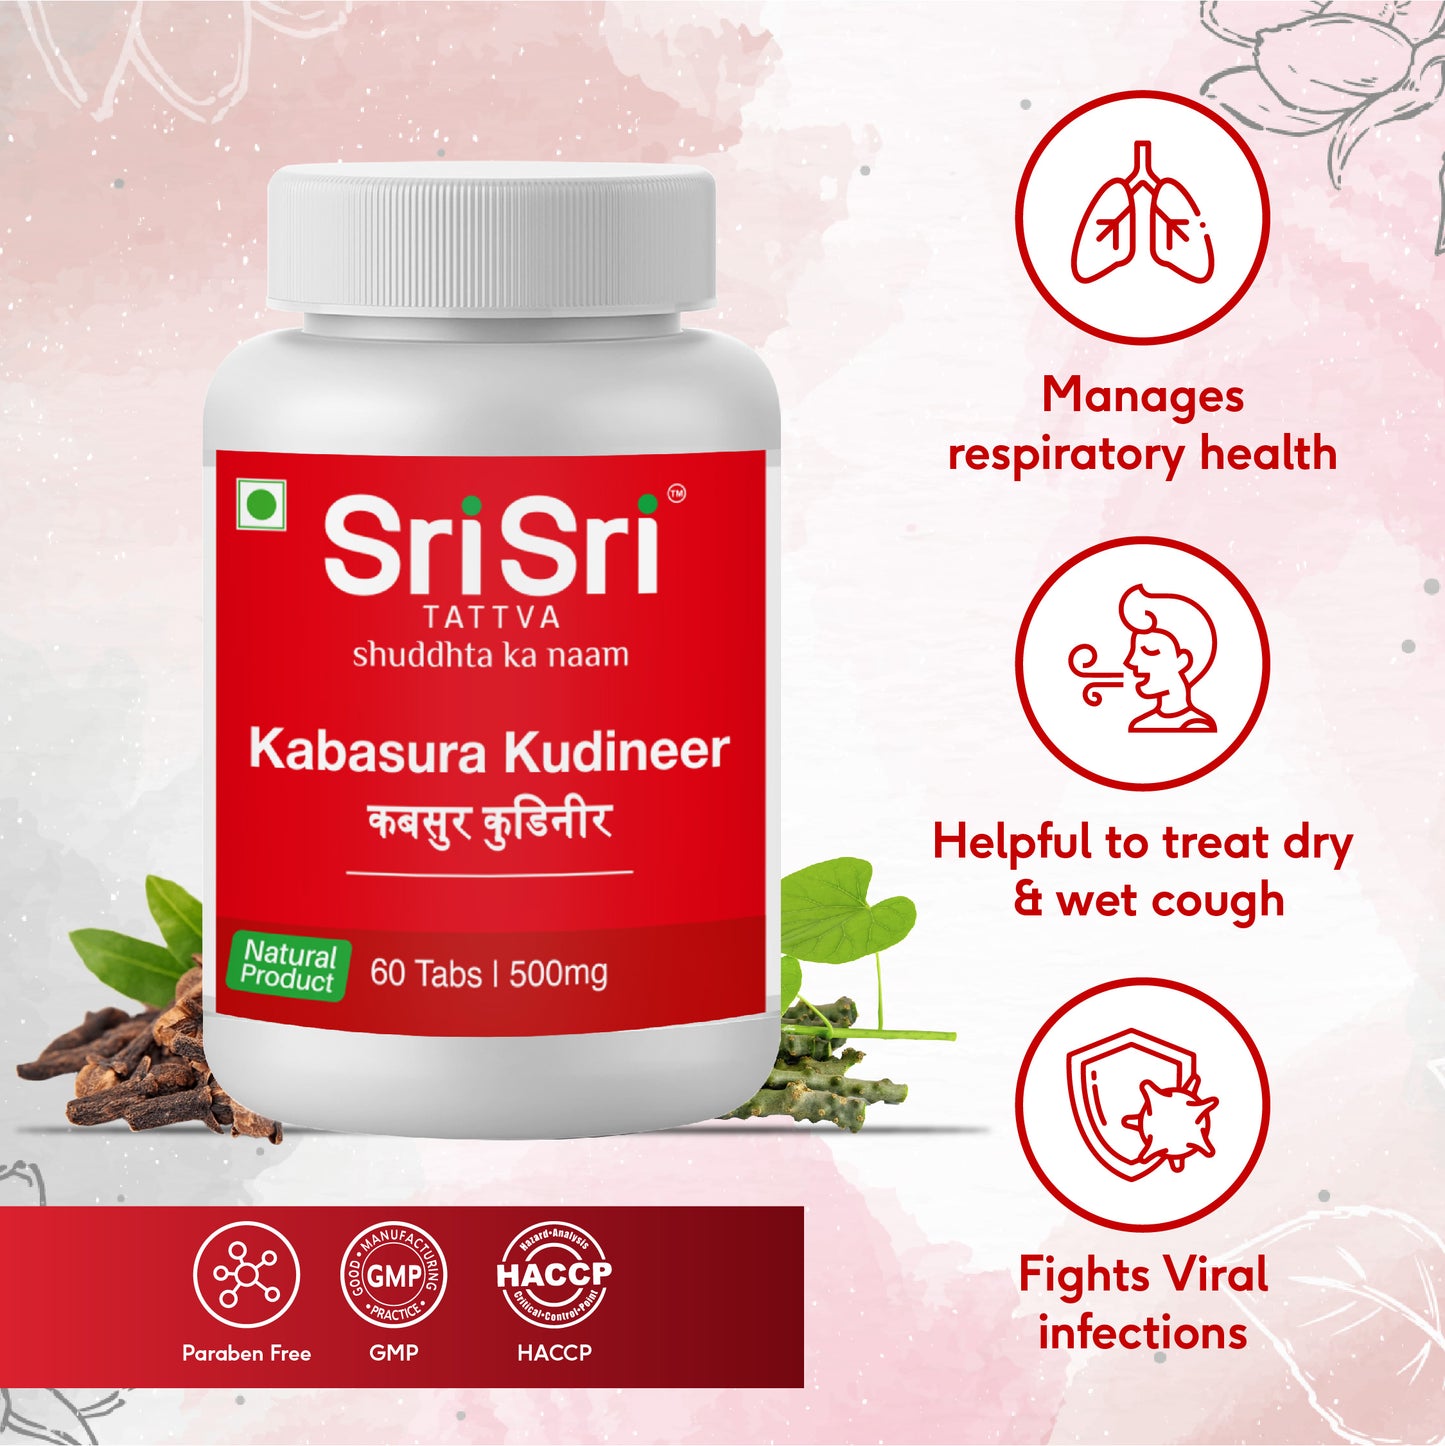 Kabasura Kudineer | Manages Respiratory Health | Helpful To Treat Dry & Wet Cough | Fights Viral Inflections | Natural Product | 60 Tabs, 500 mg